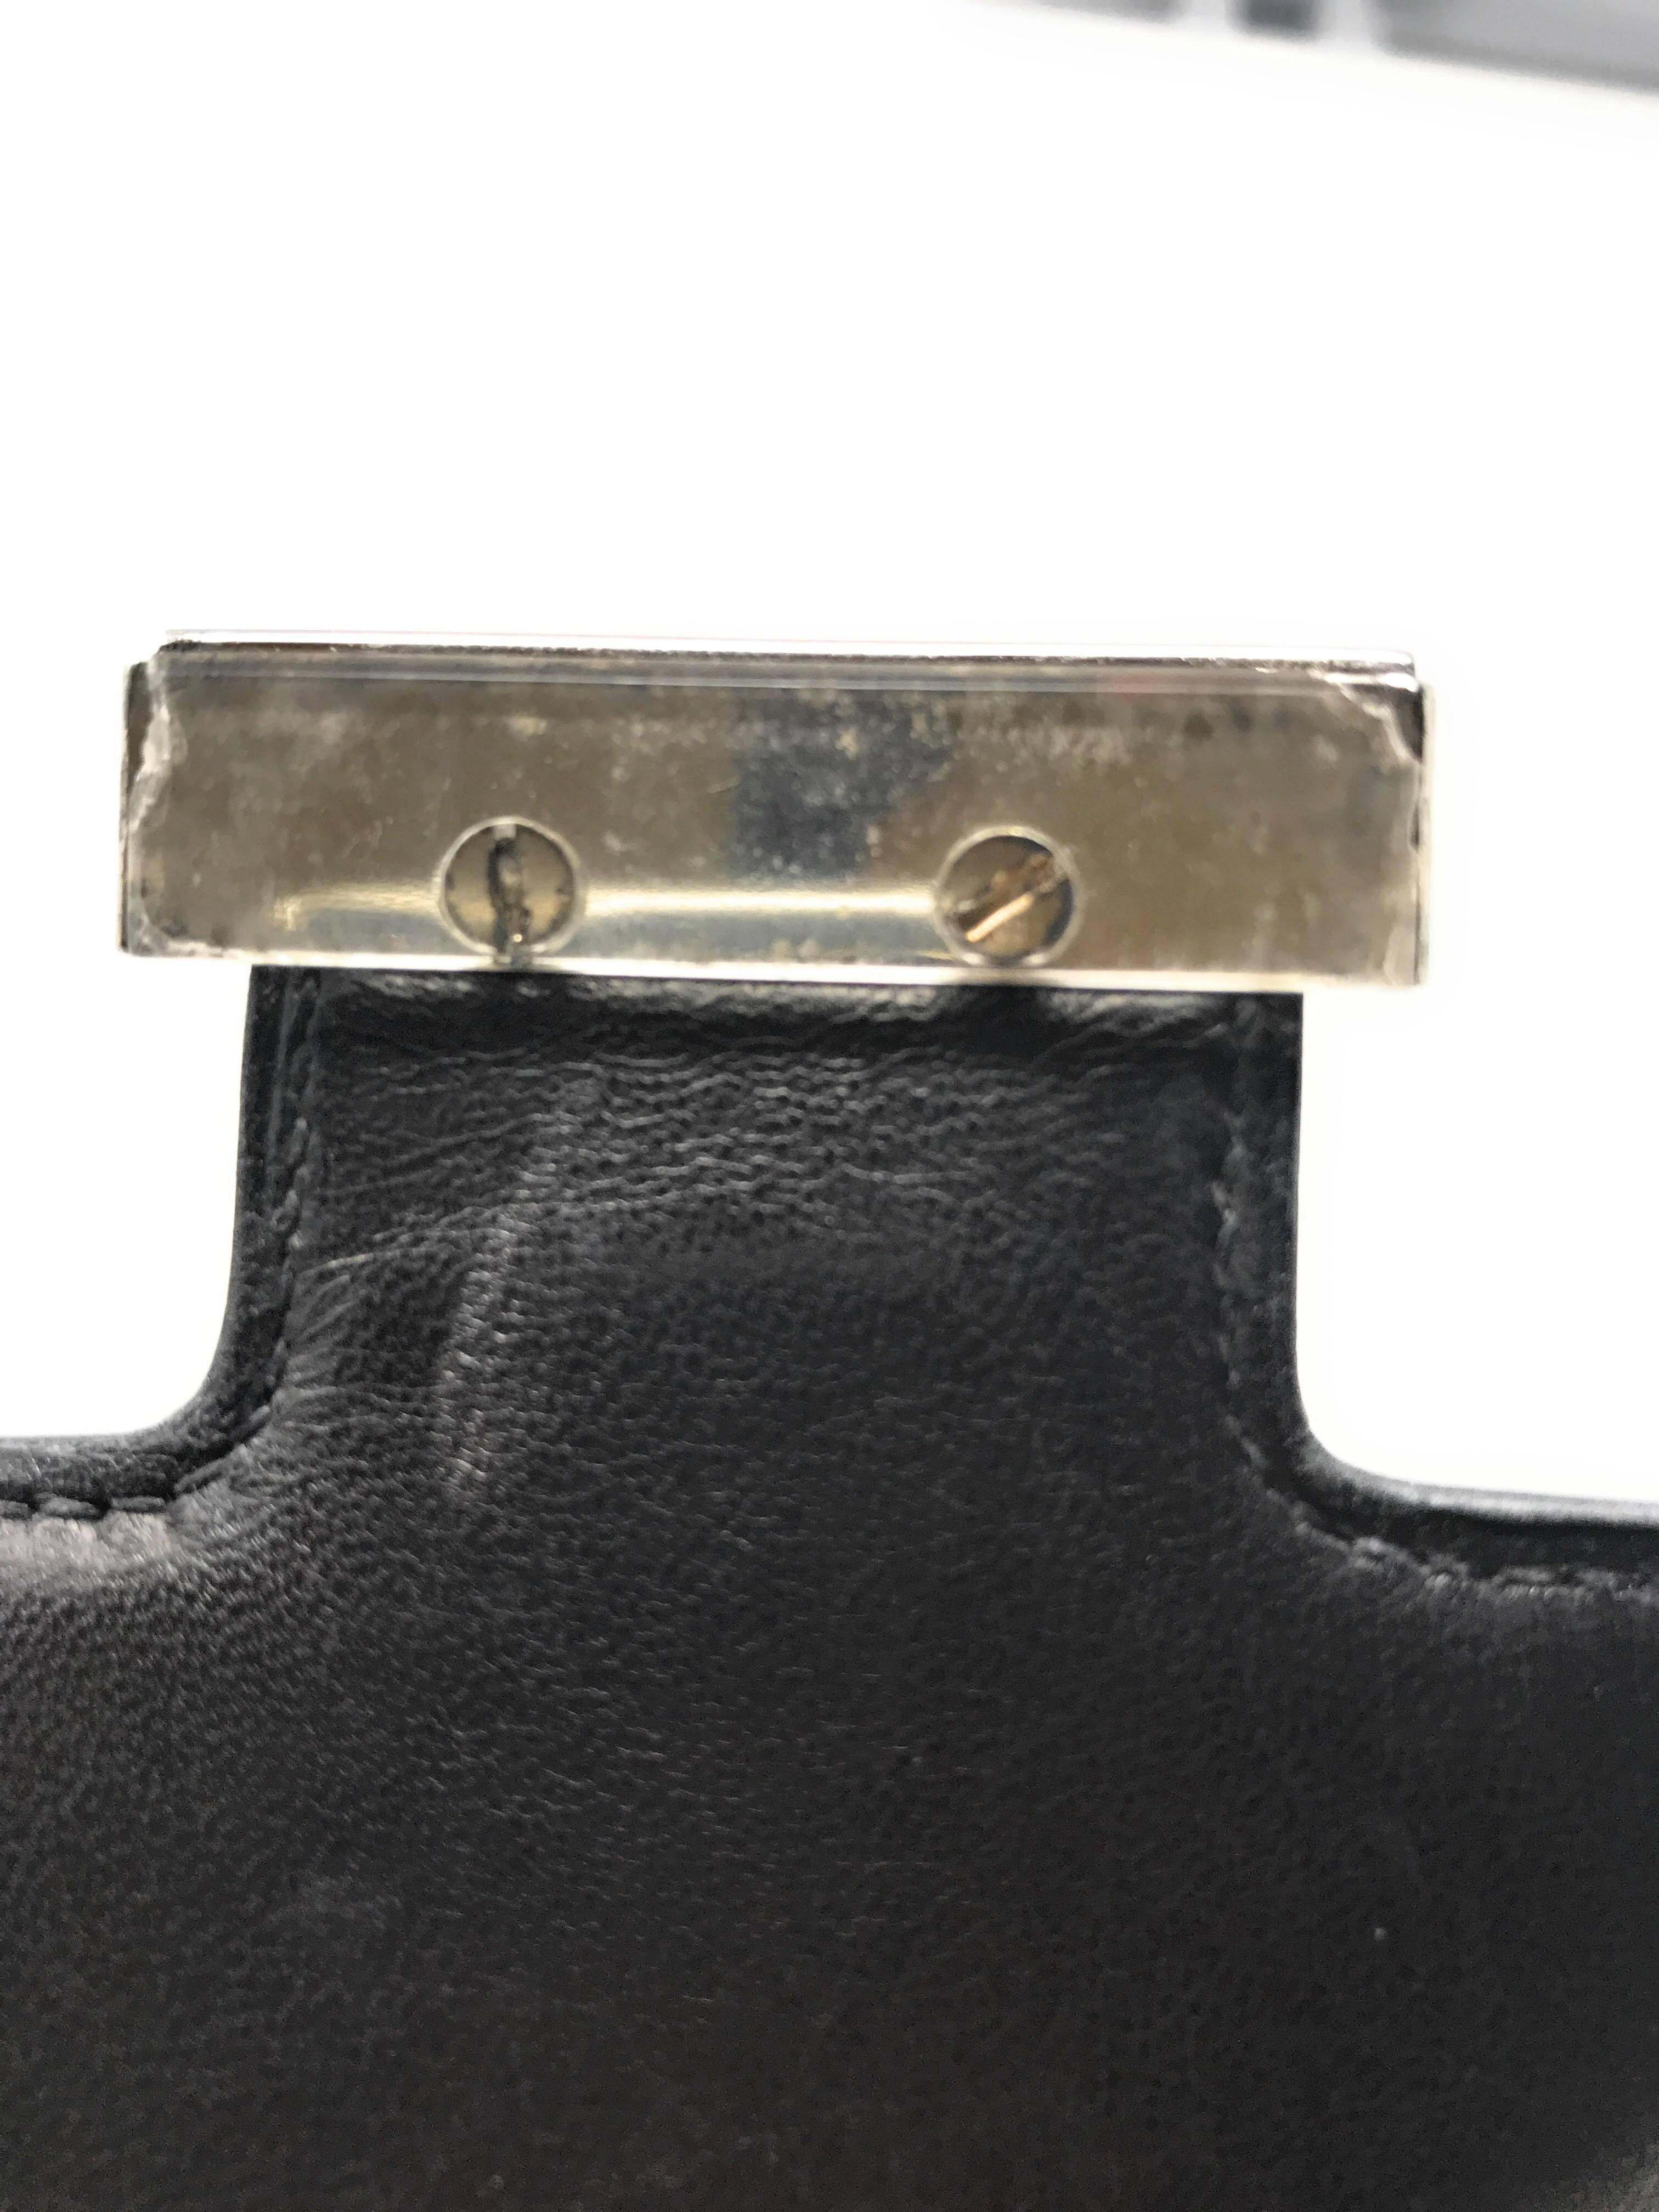 Hermes Constance 18cm Black In Good Condition For Sale In Los Angeles, CA